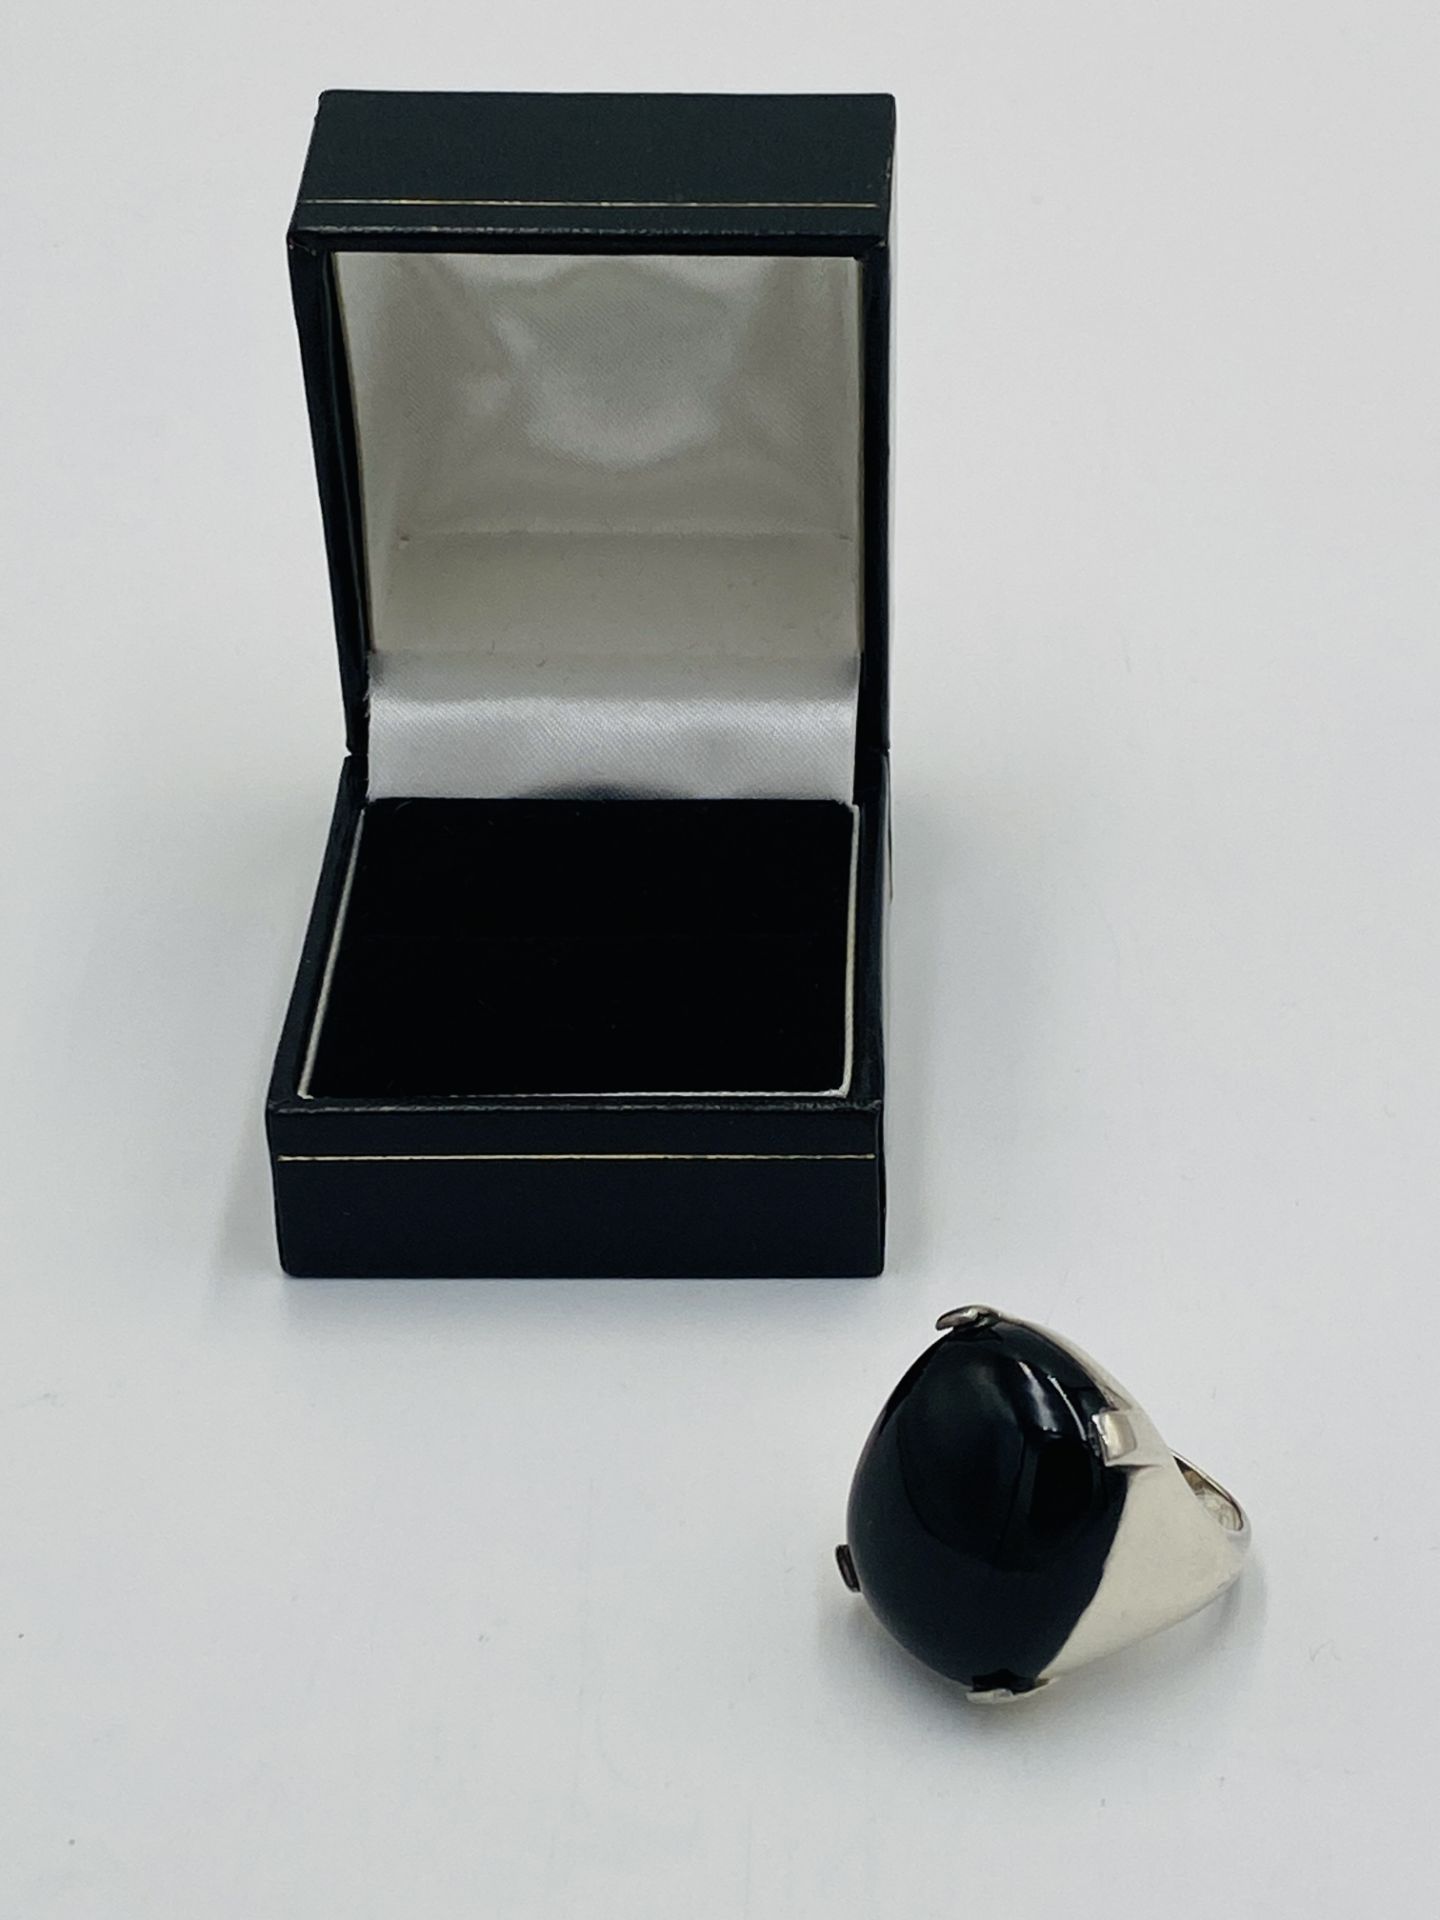 Silver ring set with an onyx stone - Image 3 of 5